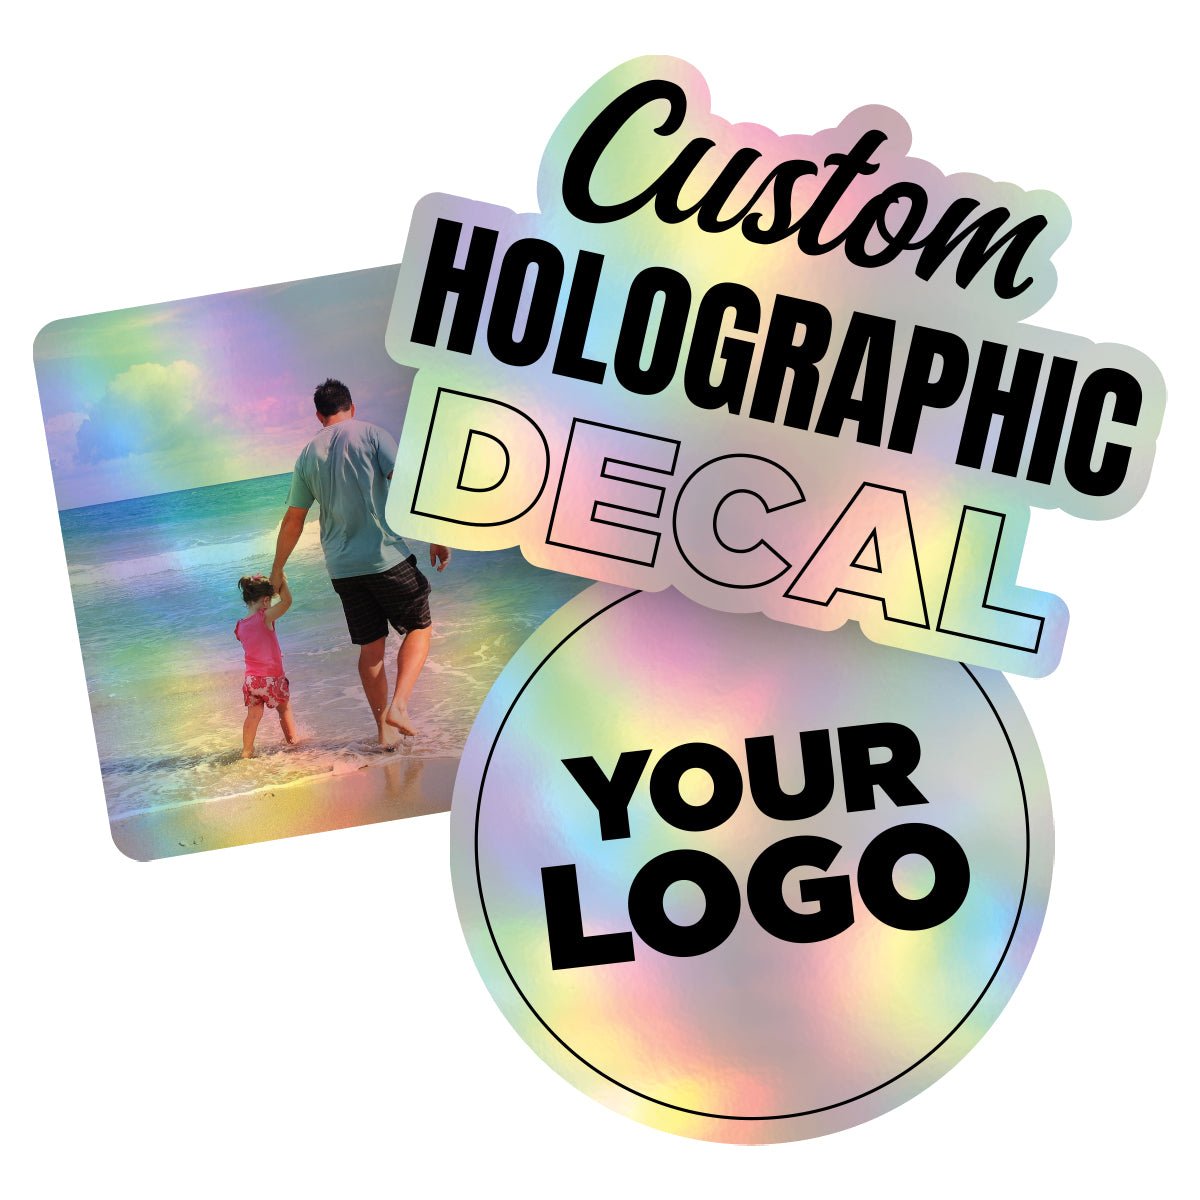 Personalized Holographic Vinyl Sticker Decal Custom Made Any Logo, Image, Text, Or Name Die Cut To Shape - 50 Pack, 4 Inch, Die Cut